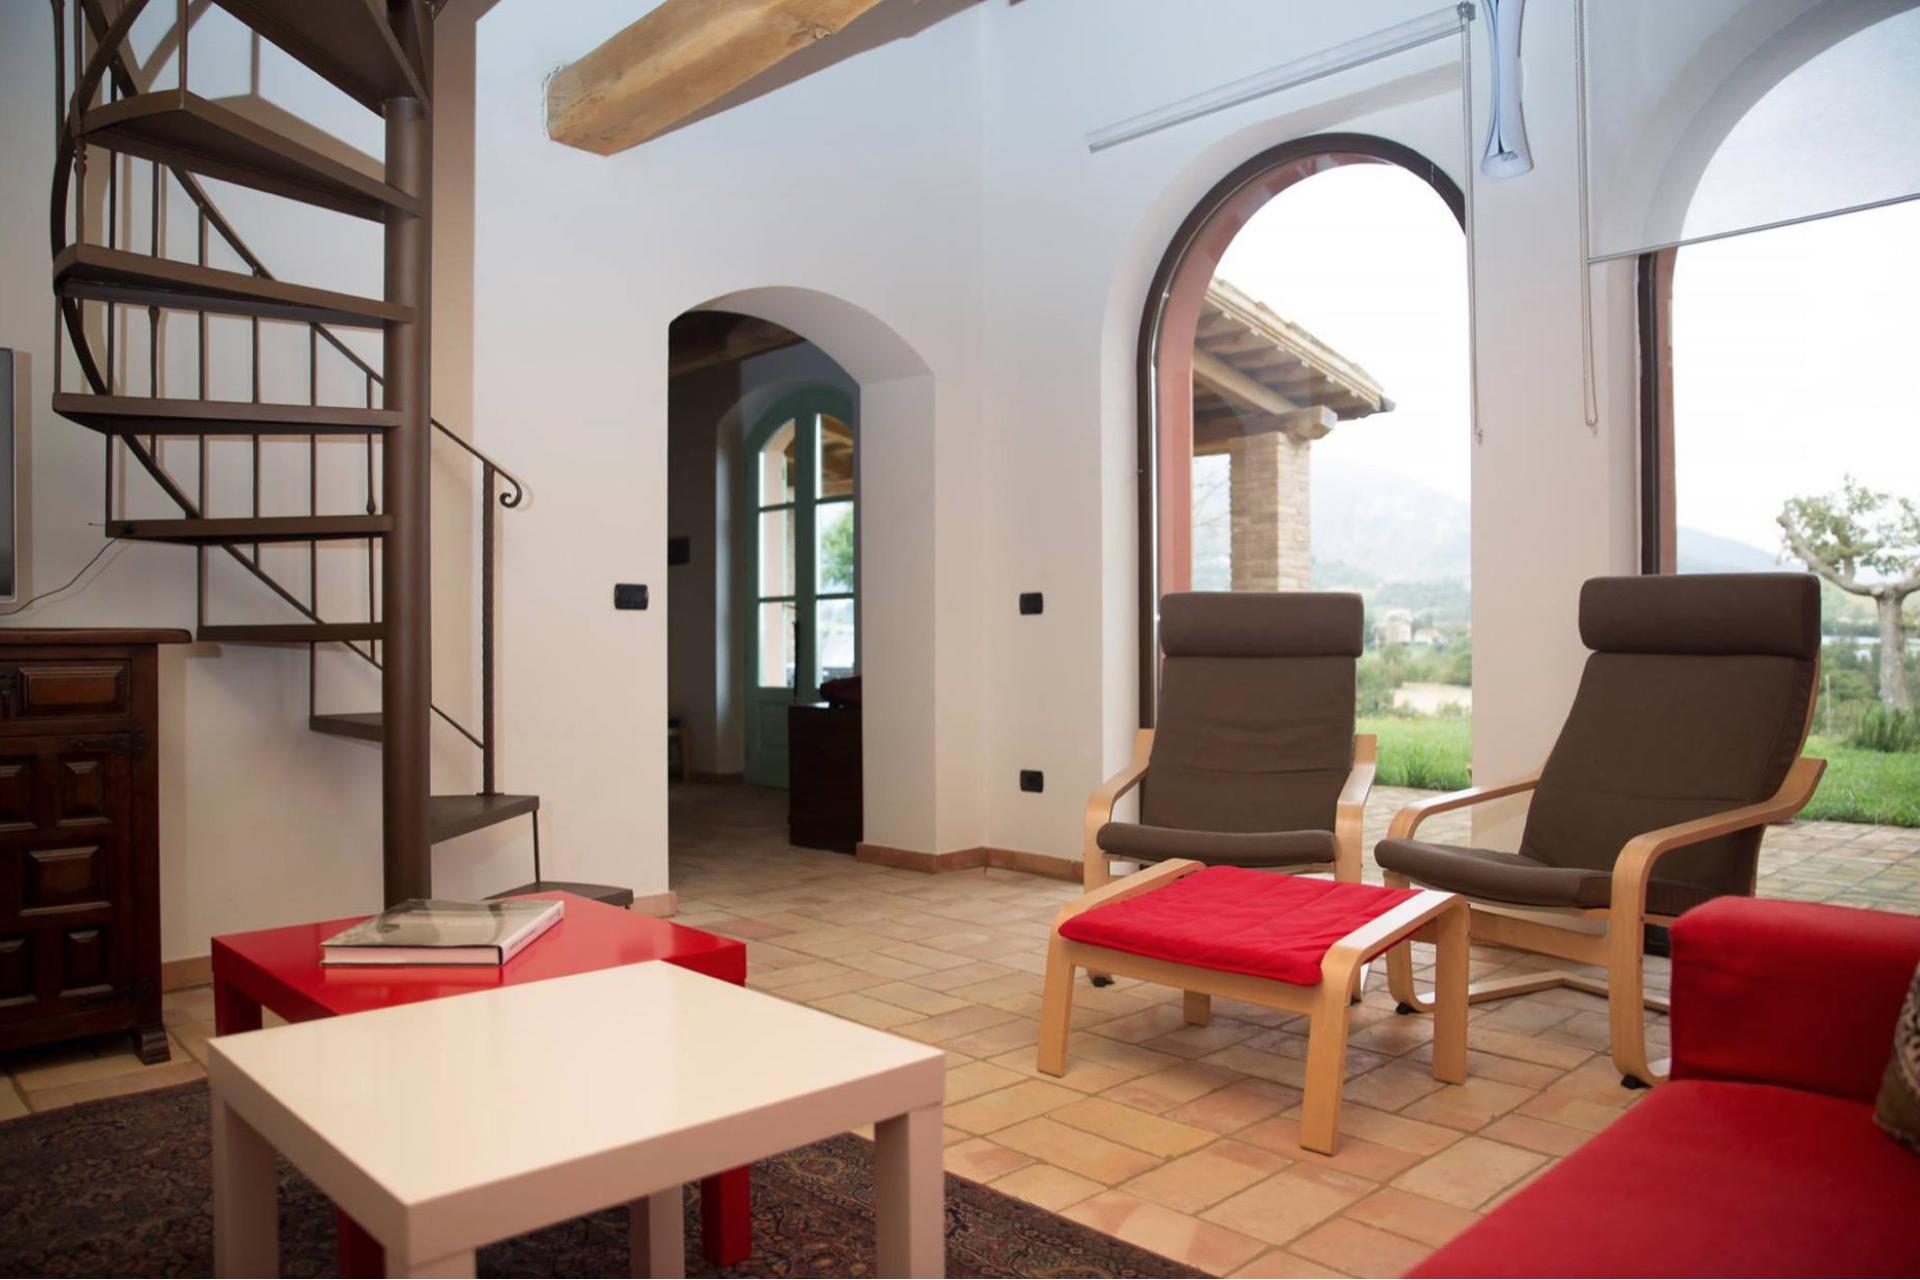 Agriturismo Marche Agriturismo Marche, cozy atmosphere and kid friendly